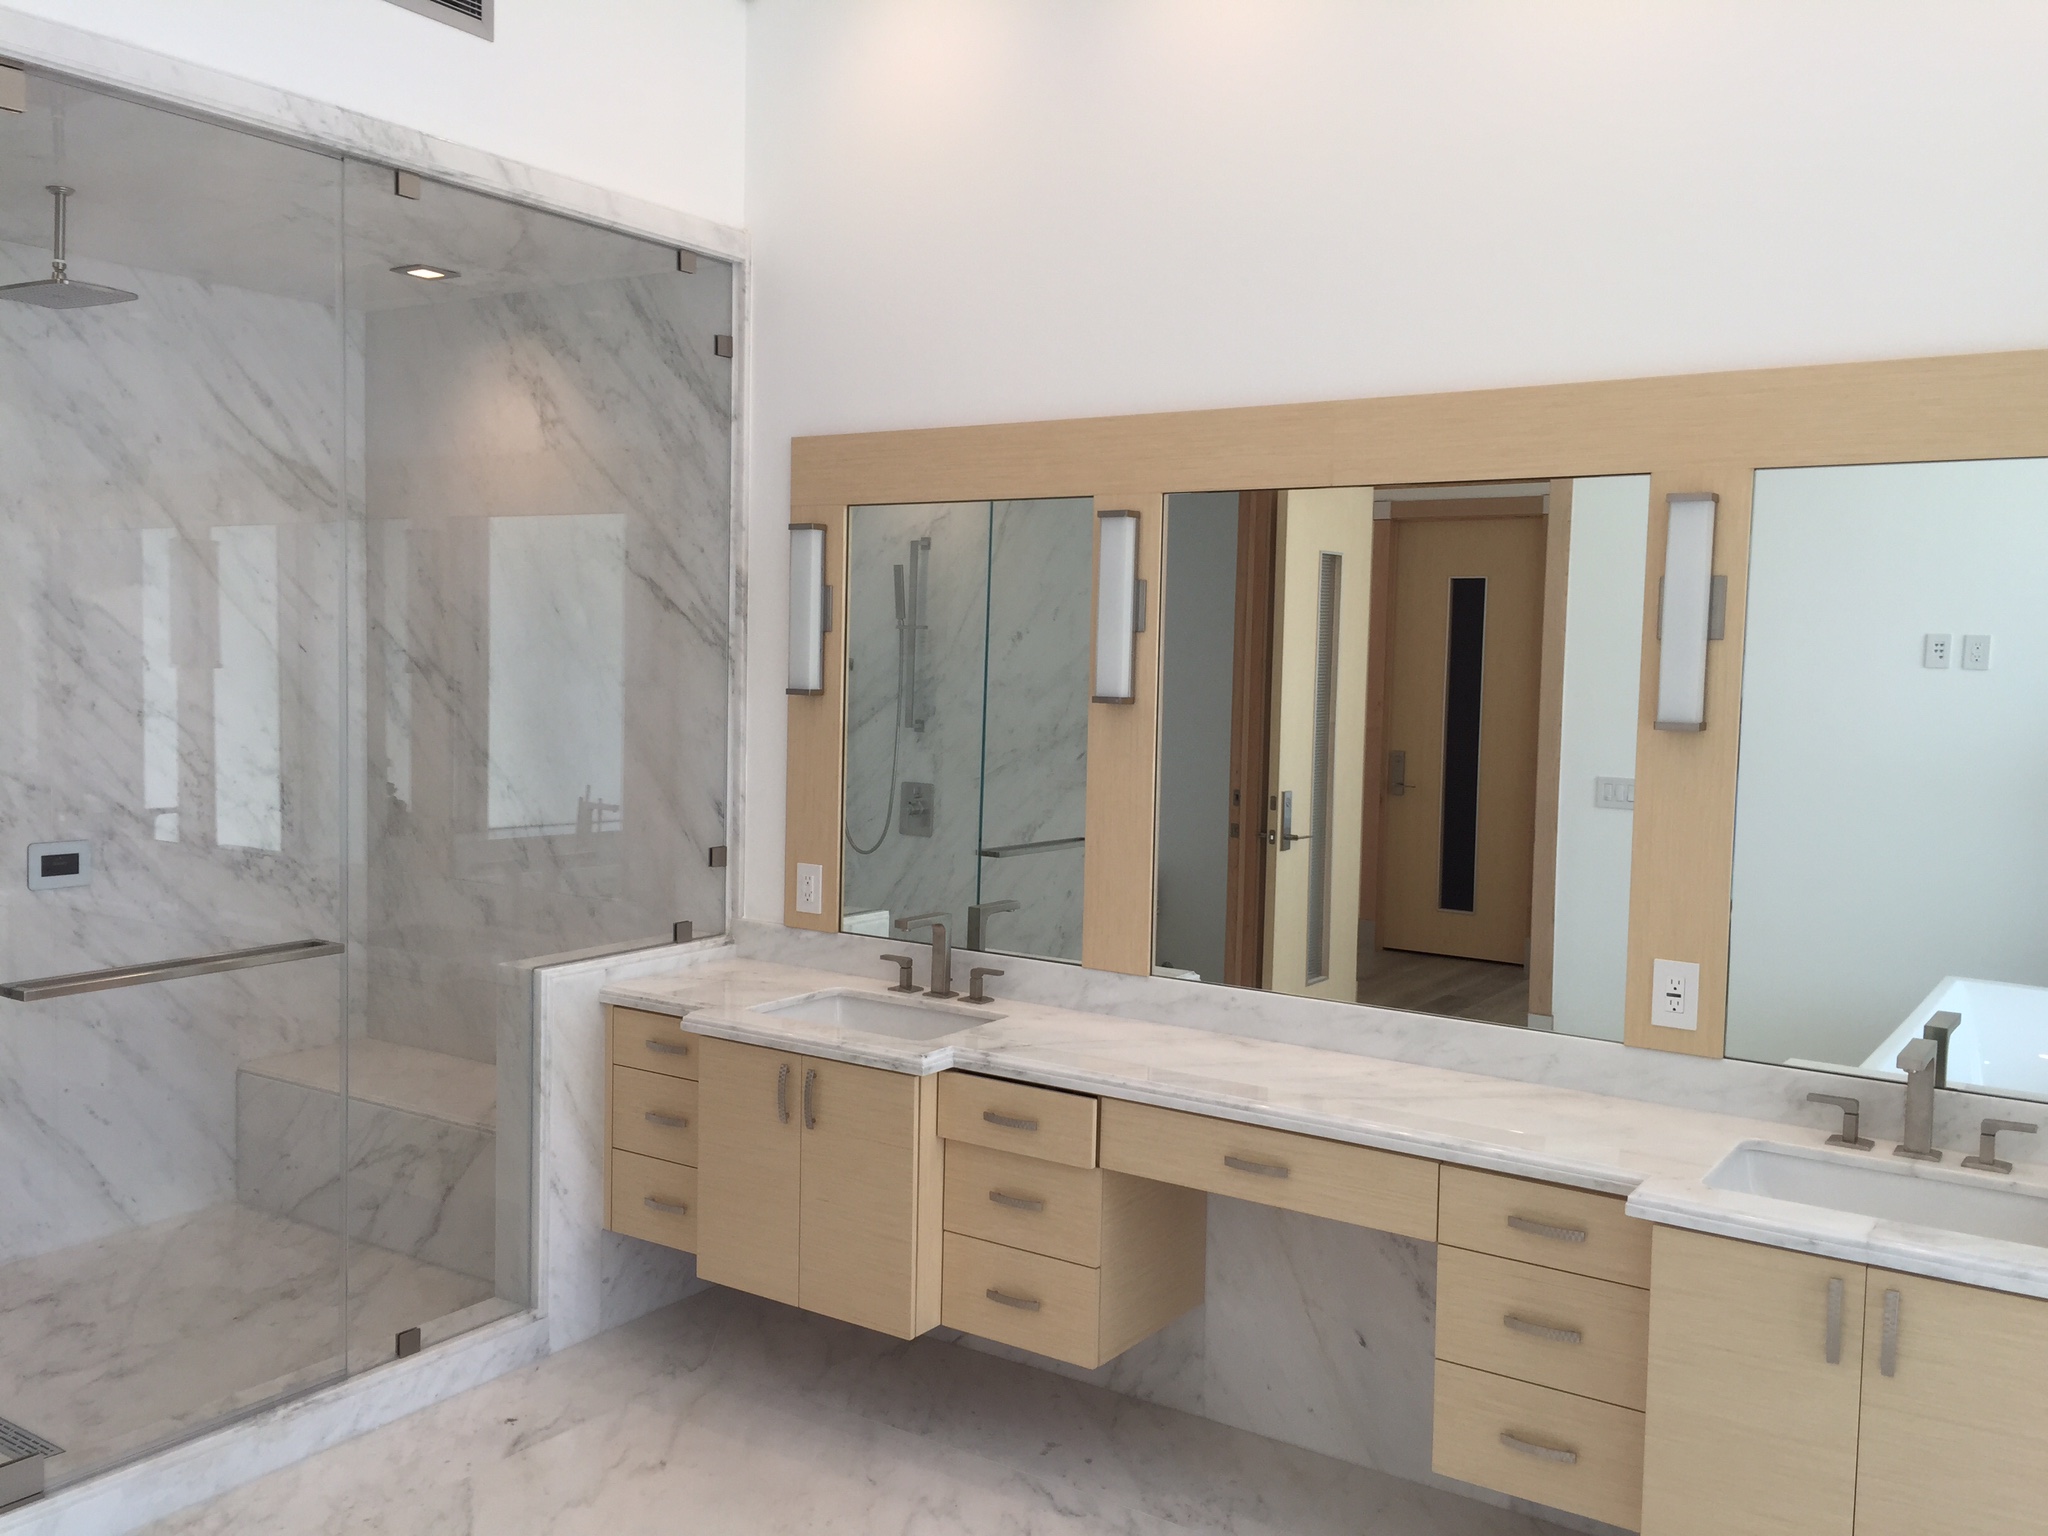 Shower doors enhance the functionality and aesthetic appeal of your bathroom